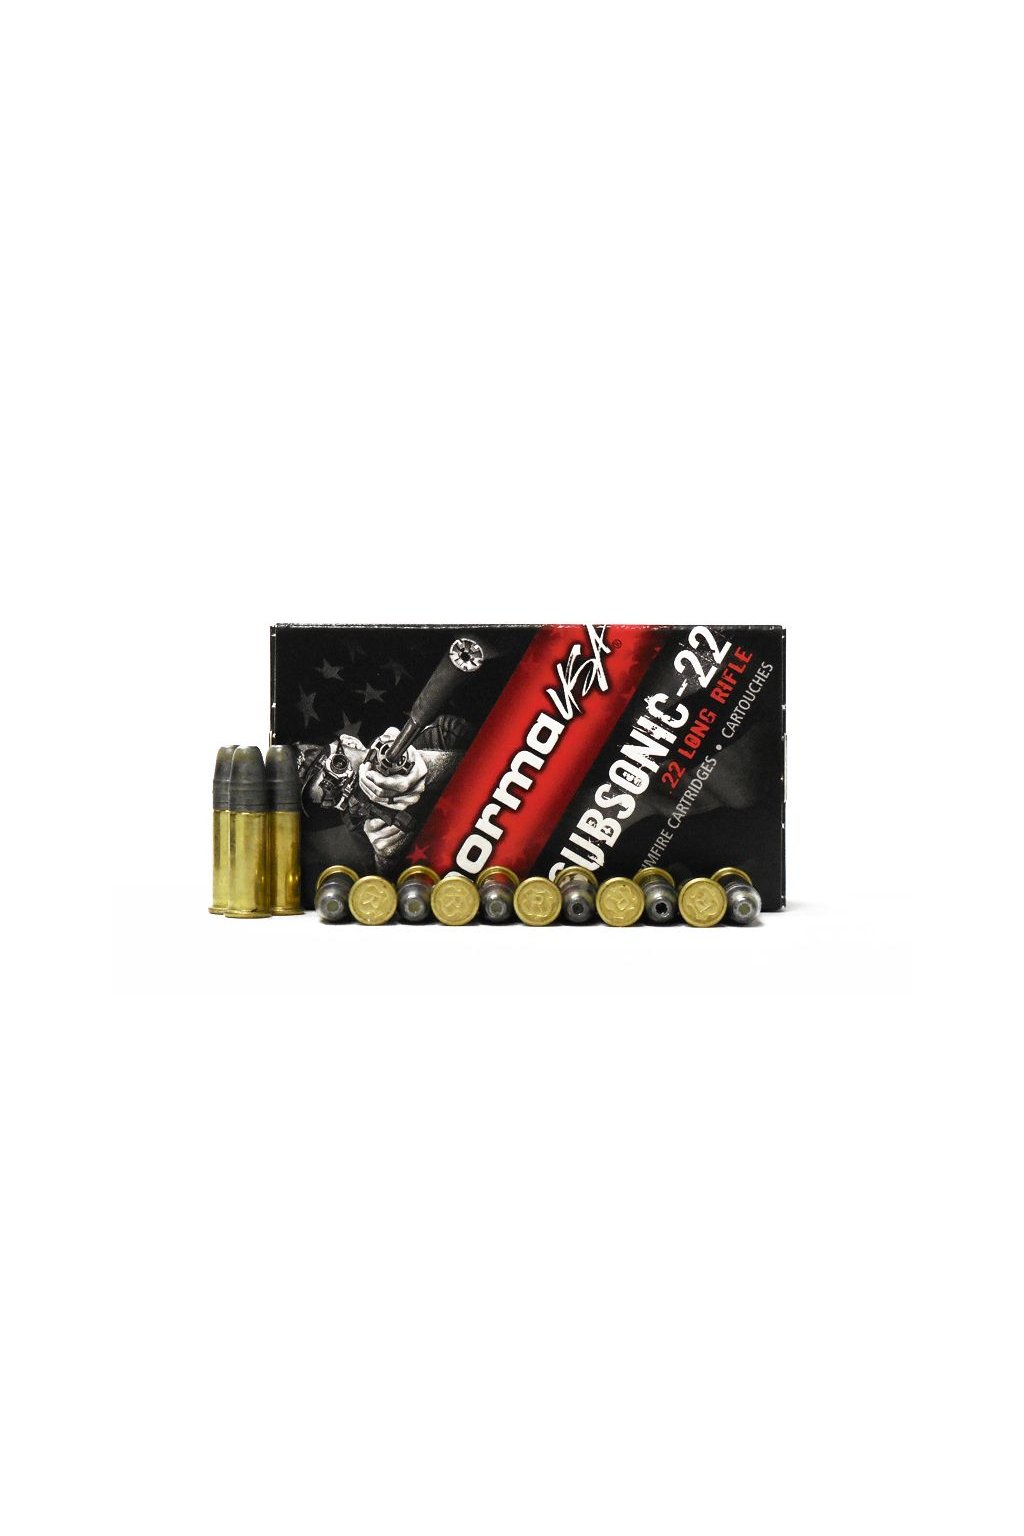 Norma 22 LR Subsonic 2,59 g